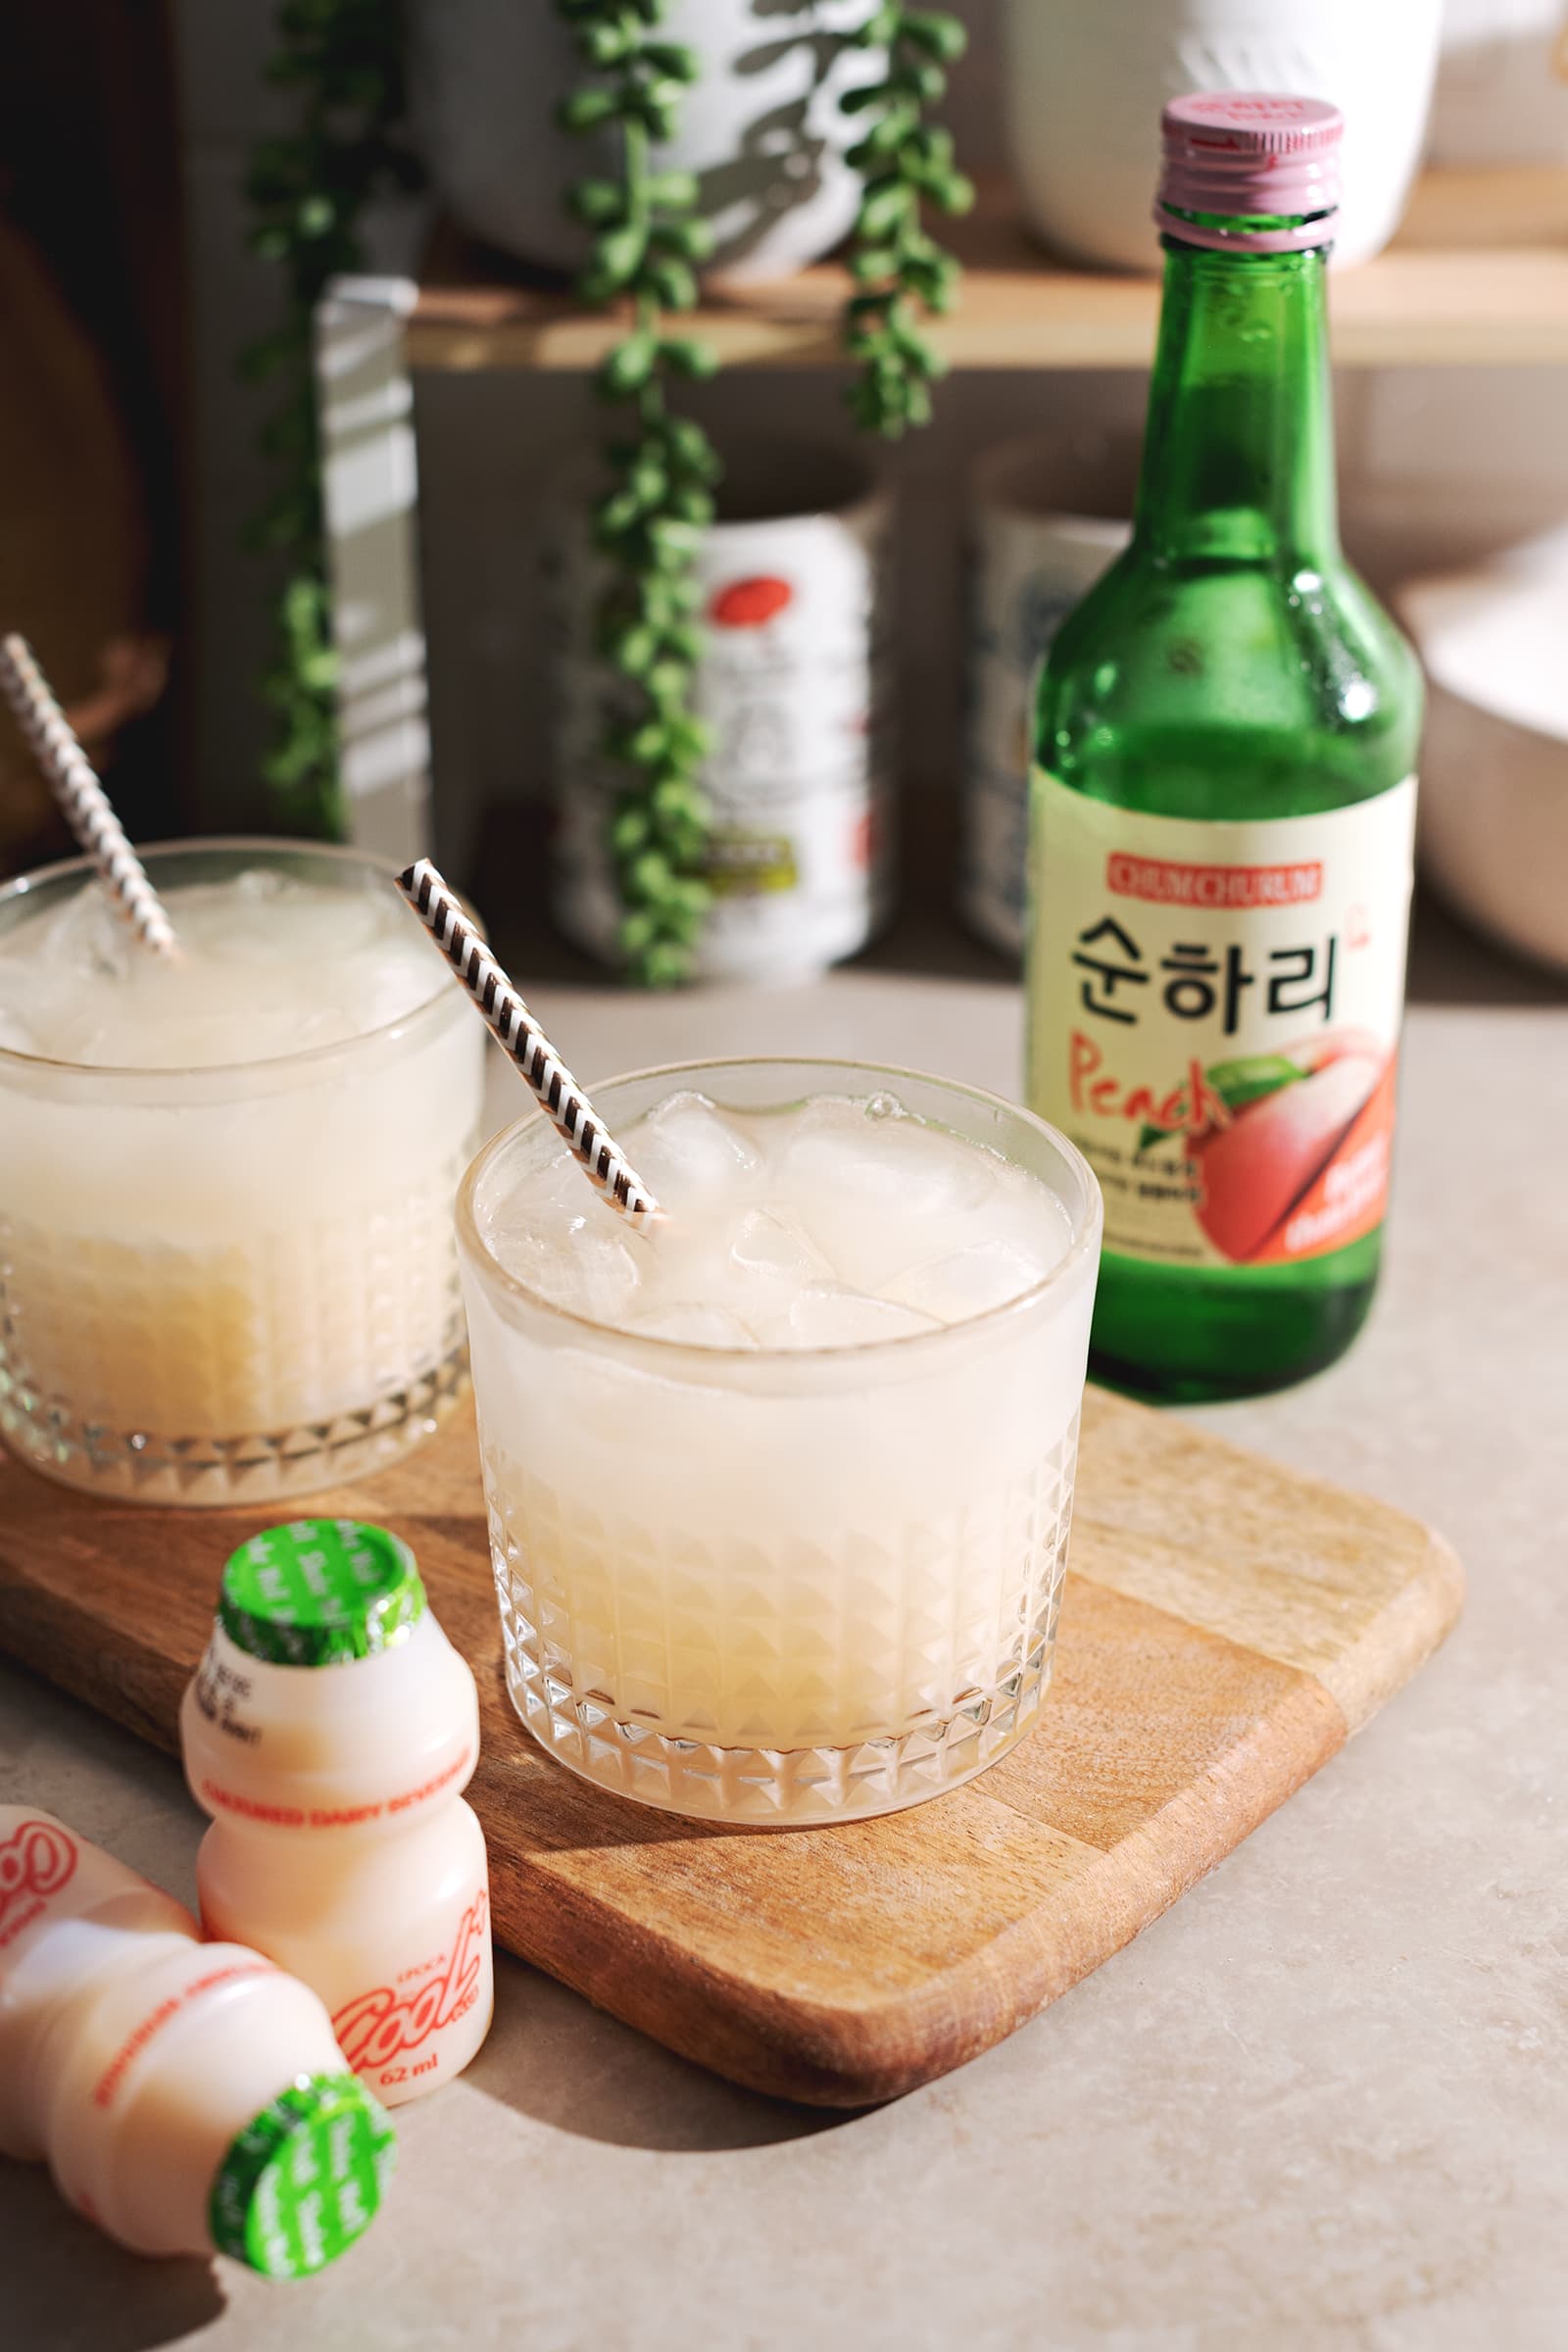 Soju yakult cocktail in a glass with soju bottle in the background and yakult in the foreground.